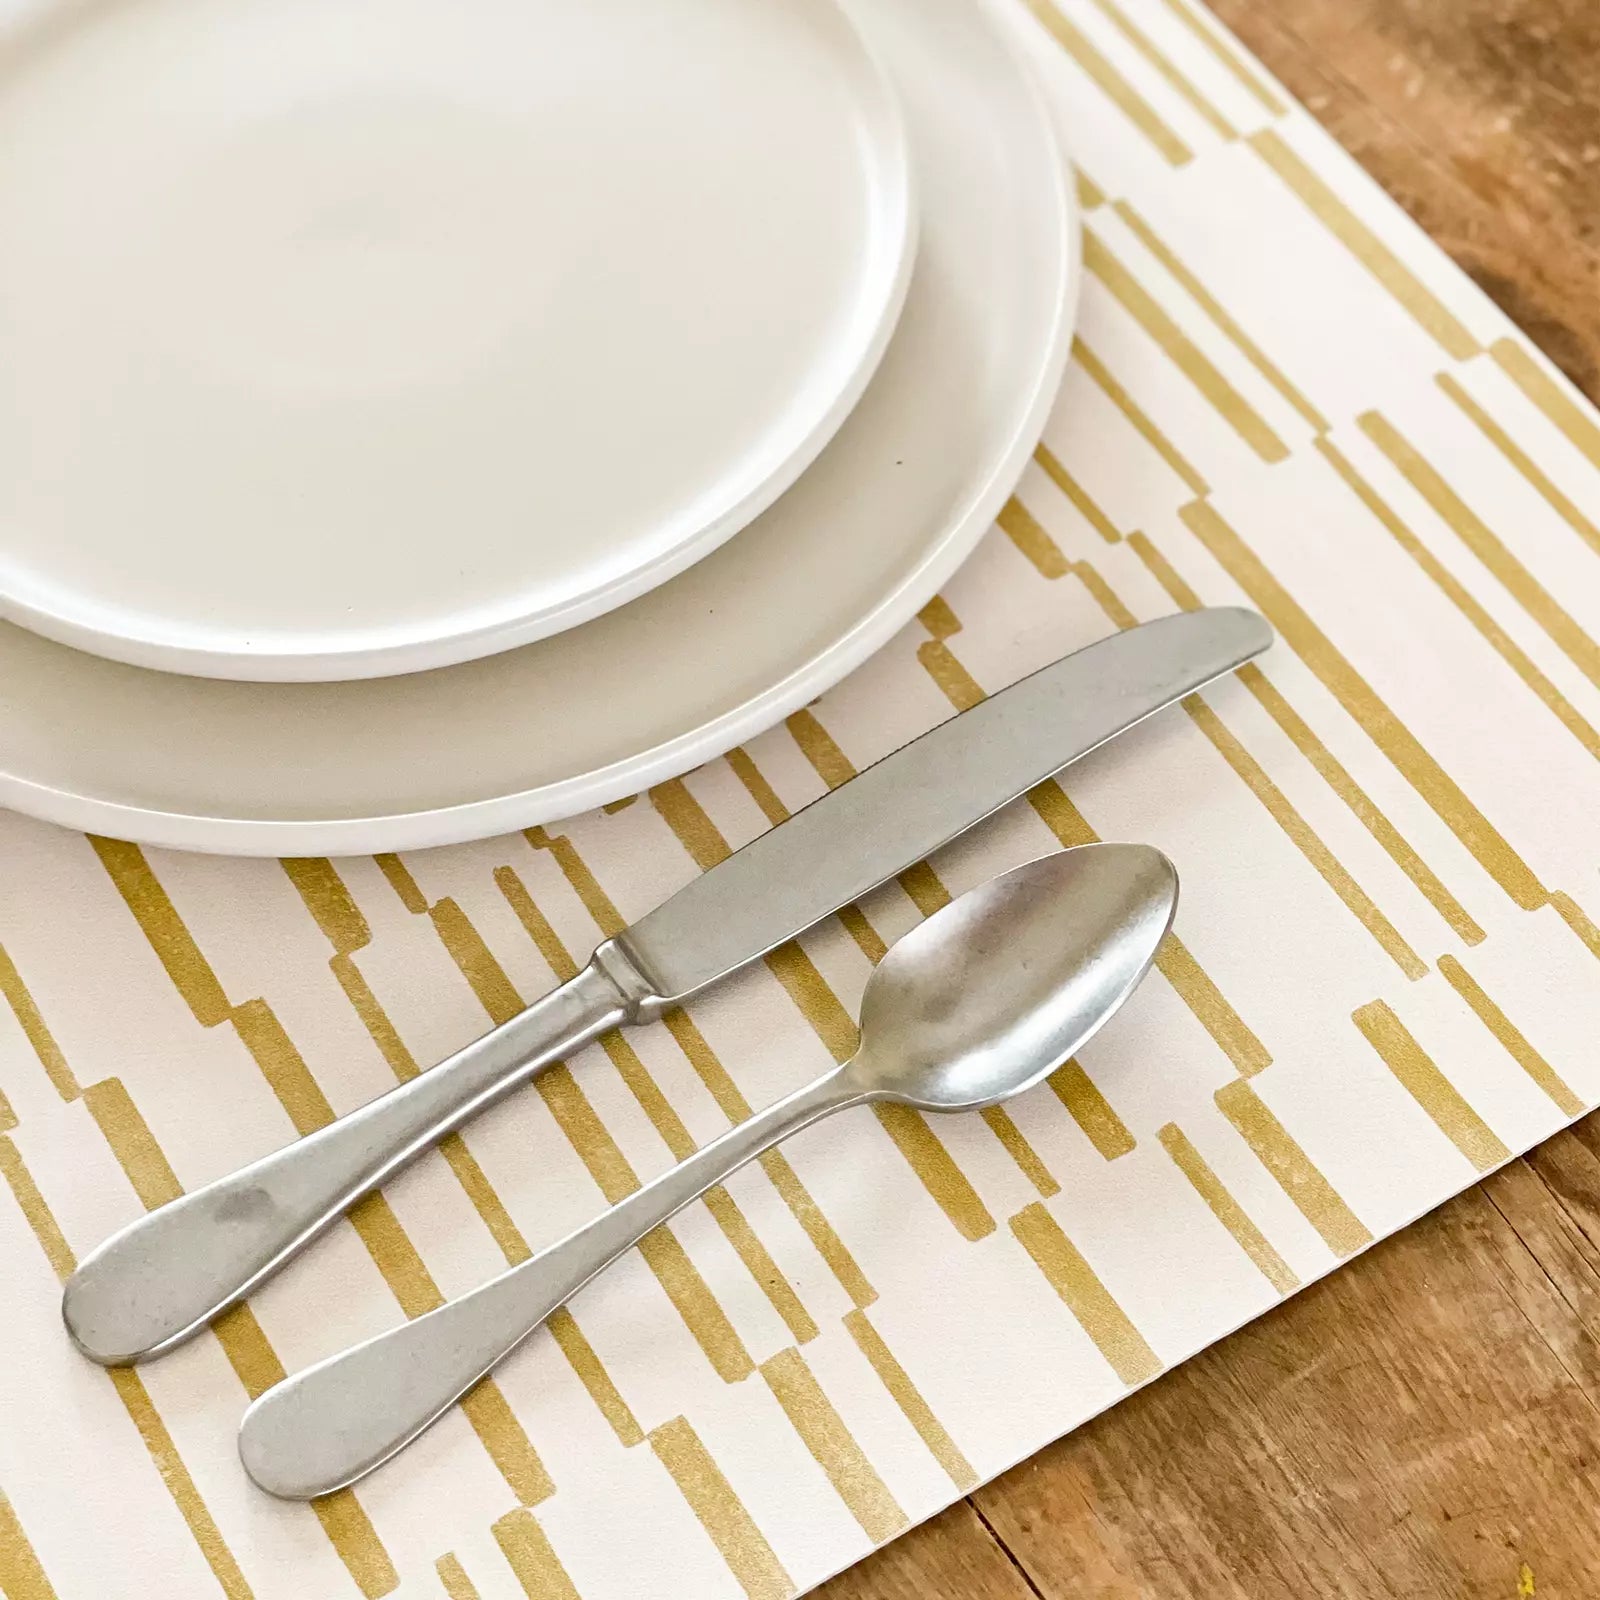 Nara Ochre Yellow Striped place mat up close with plate and silverware